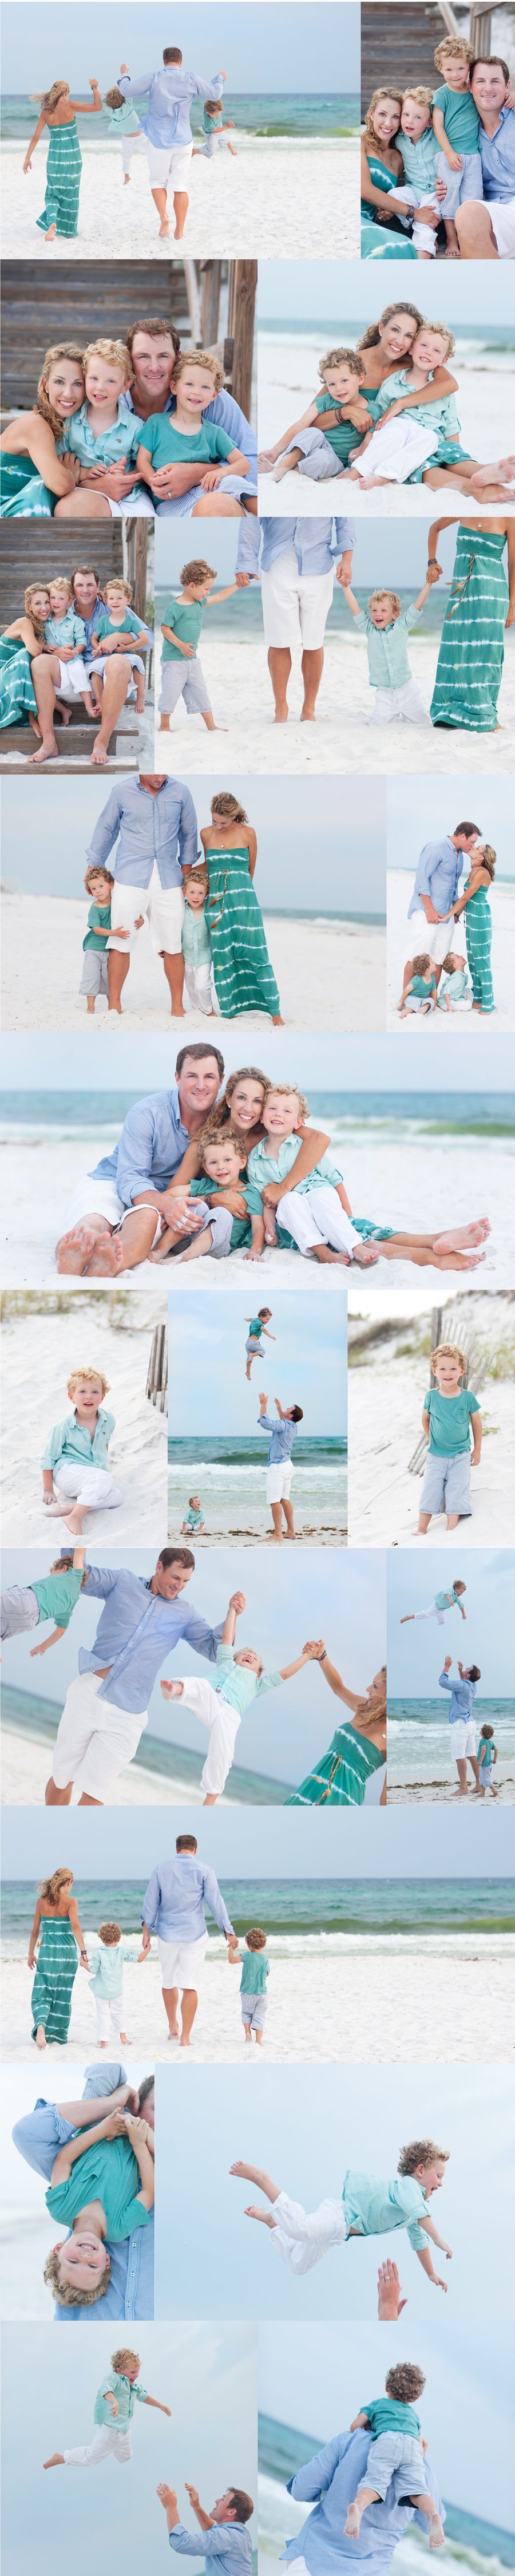 Beautiful Beach Family Photos – One day I'll find someone to take pictures l